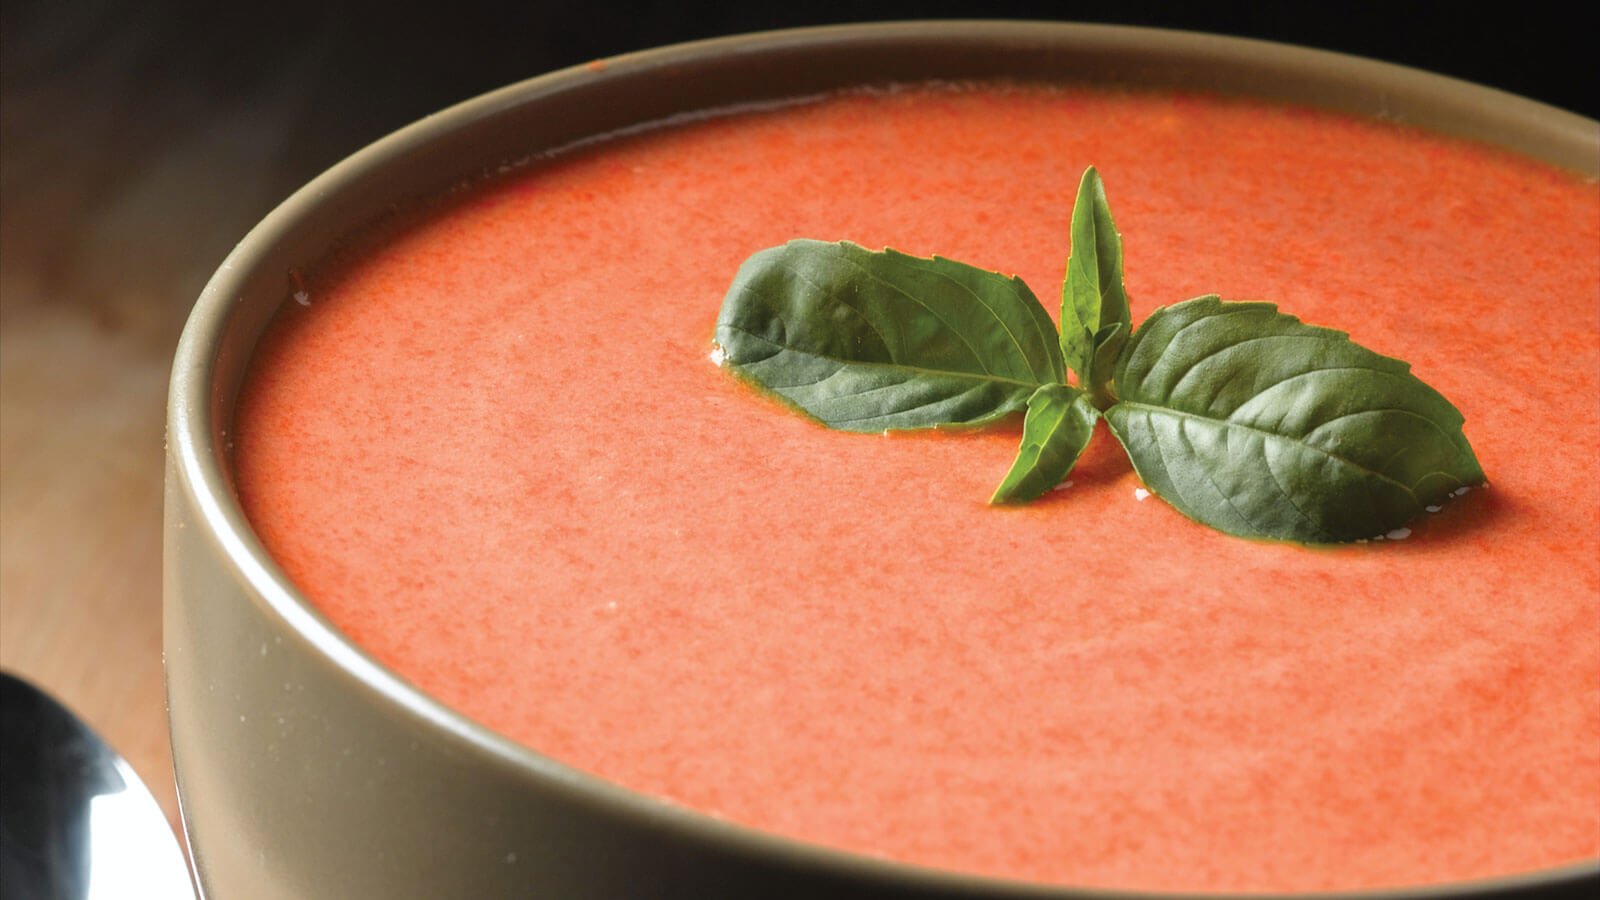 Fire Roasted Tomato Bisque